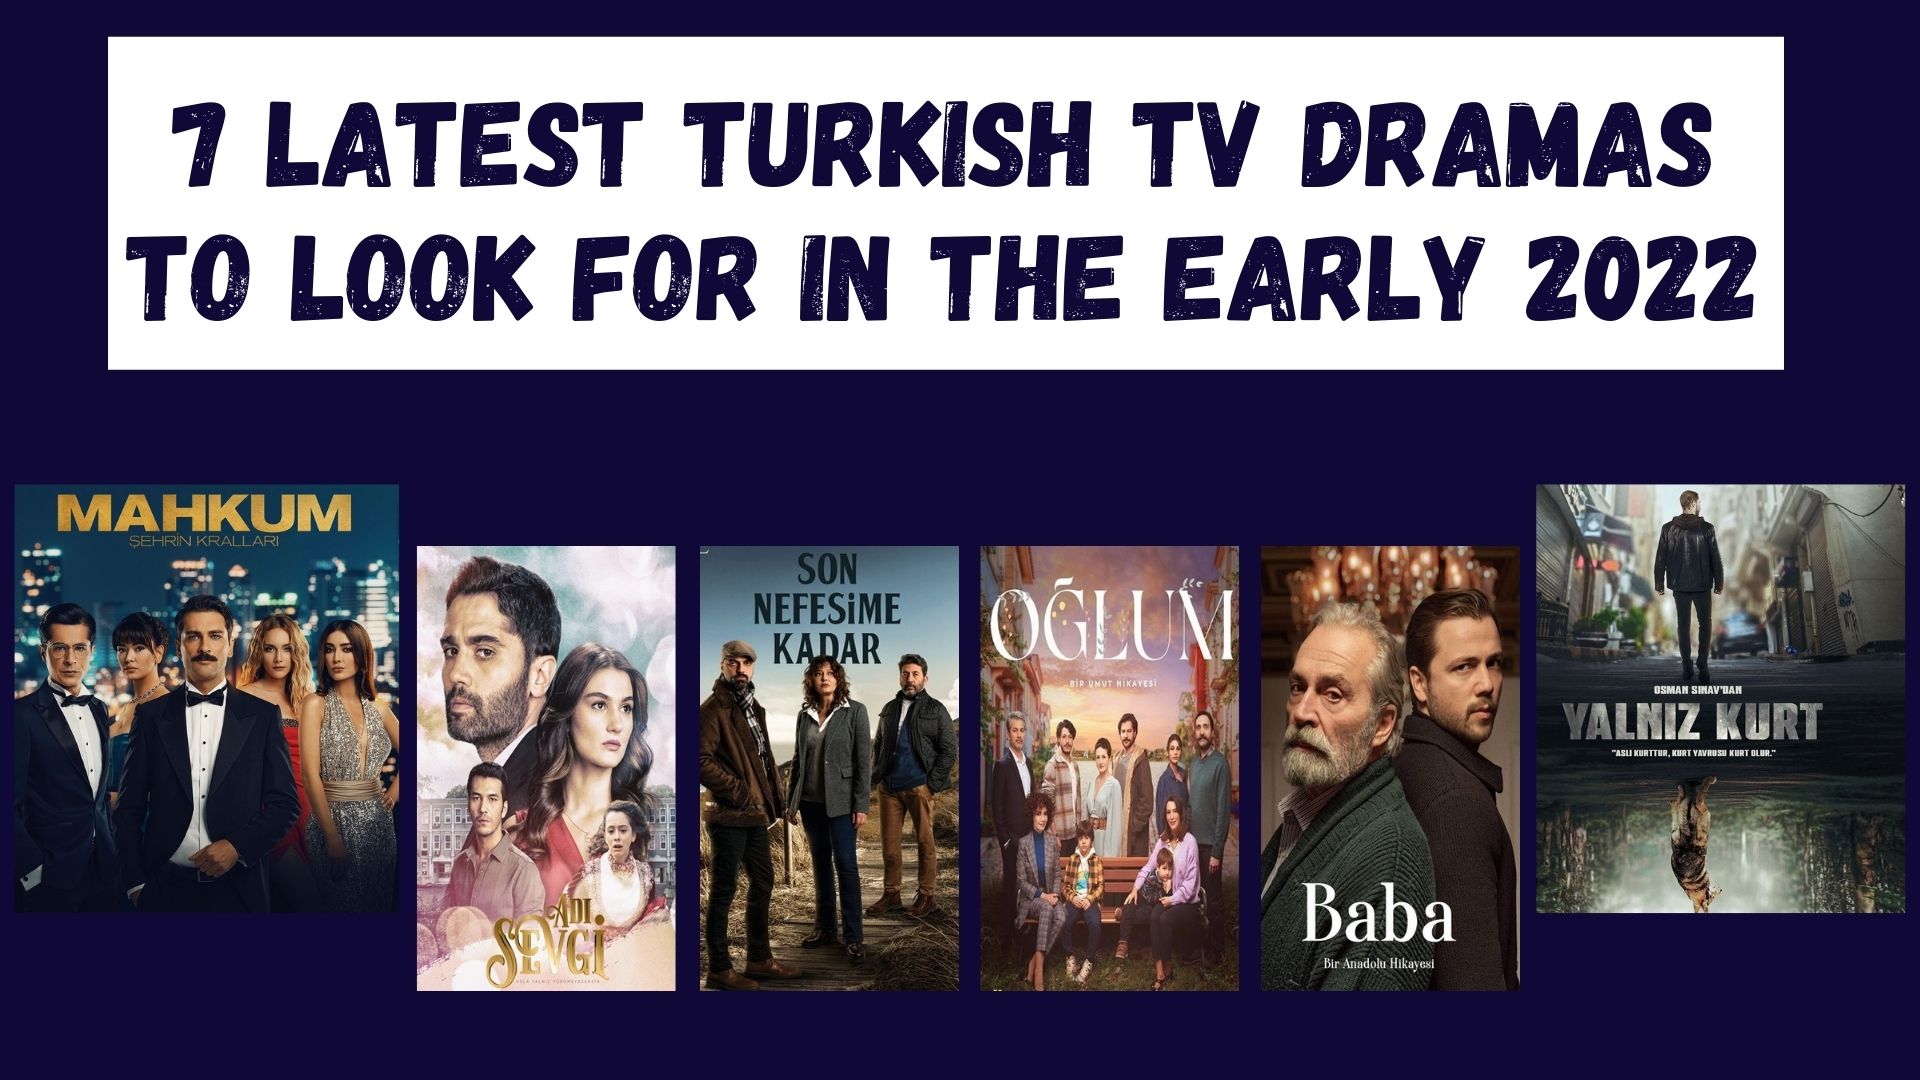 7 Latest Turkish TV Dramas to Look for in the Early 2022